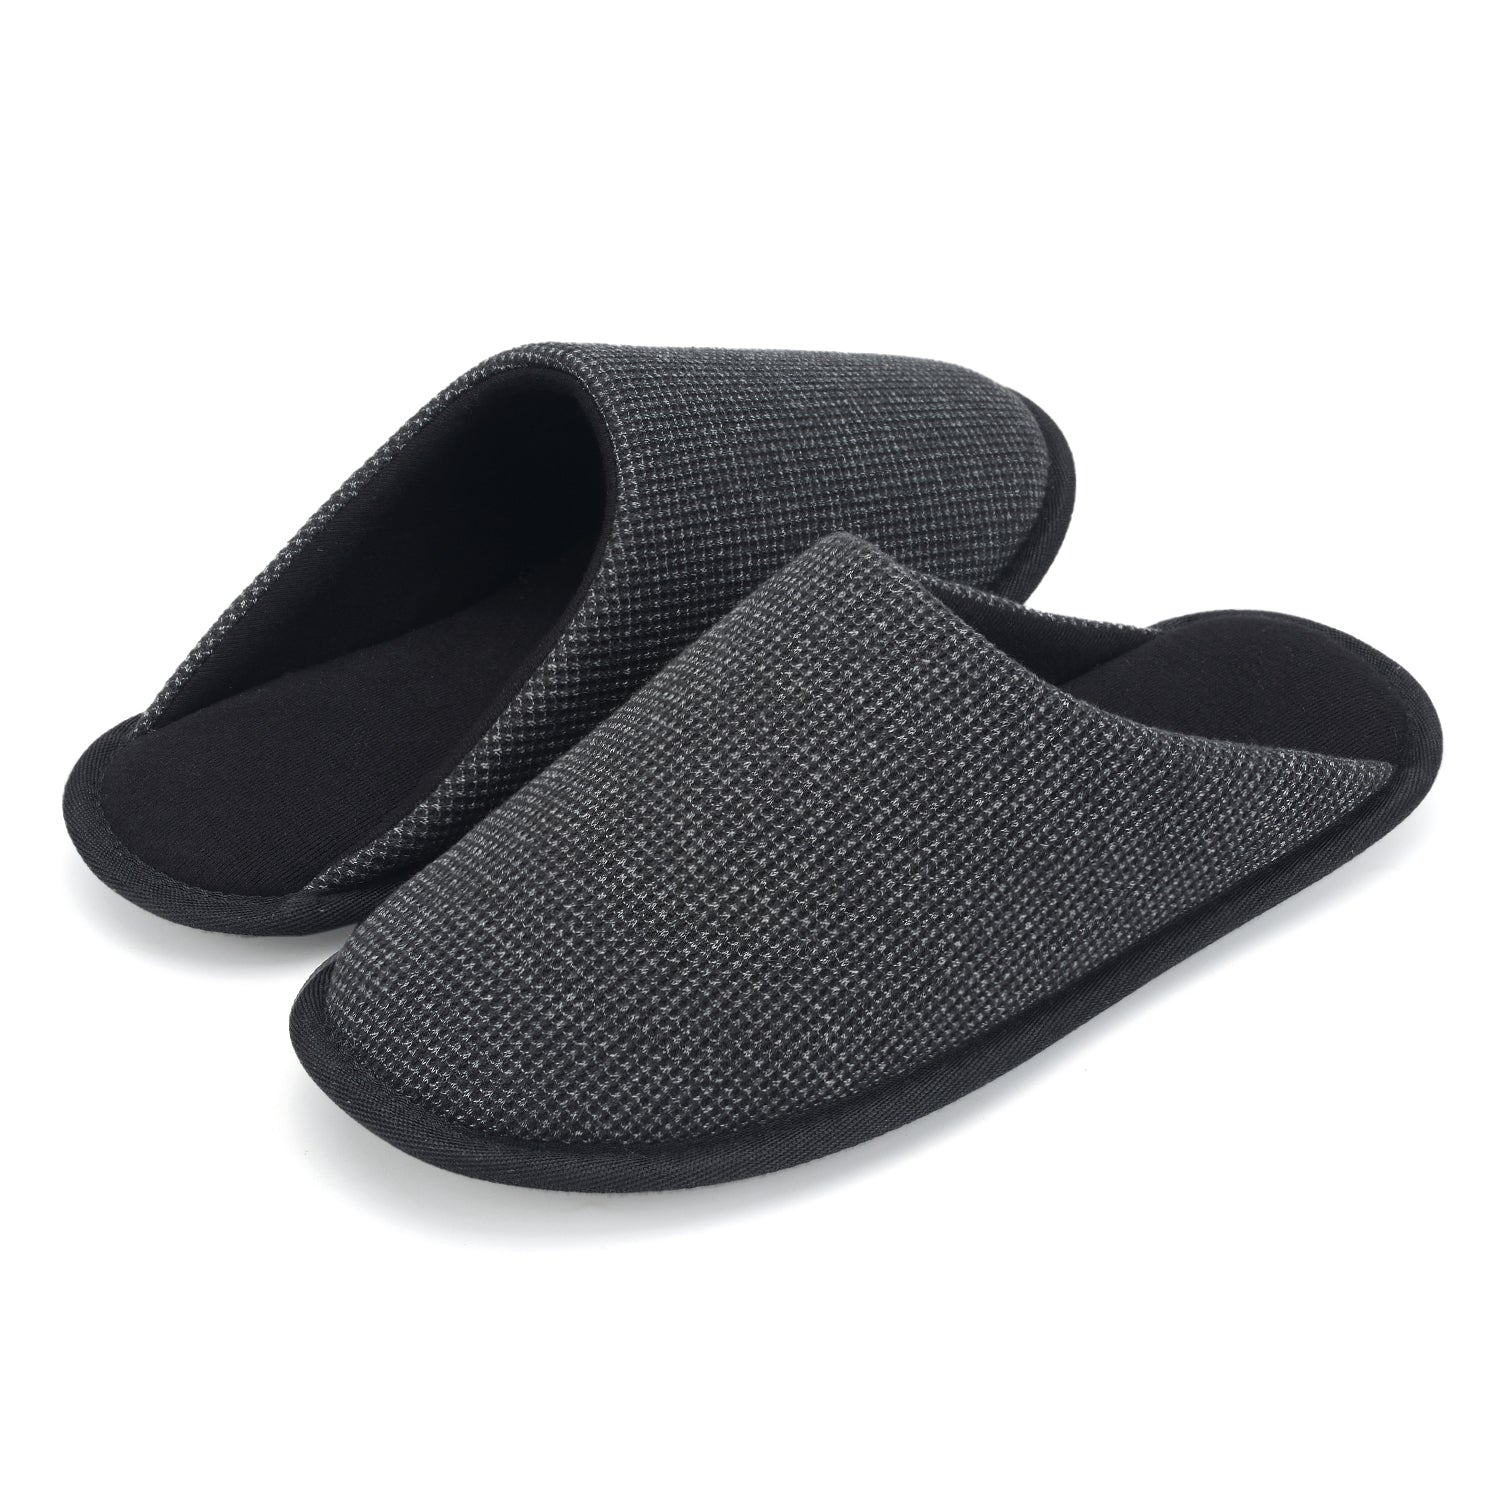 NineCiFun Mens Cool Slipper Shoes Bedroom Scuff Slippers